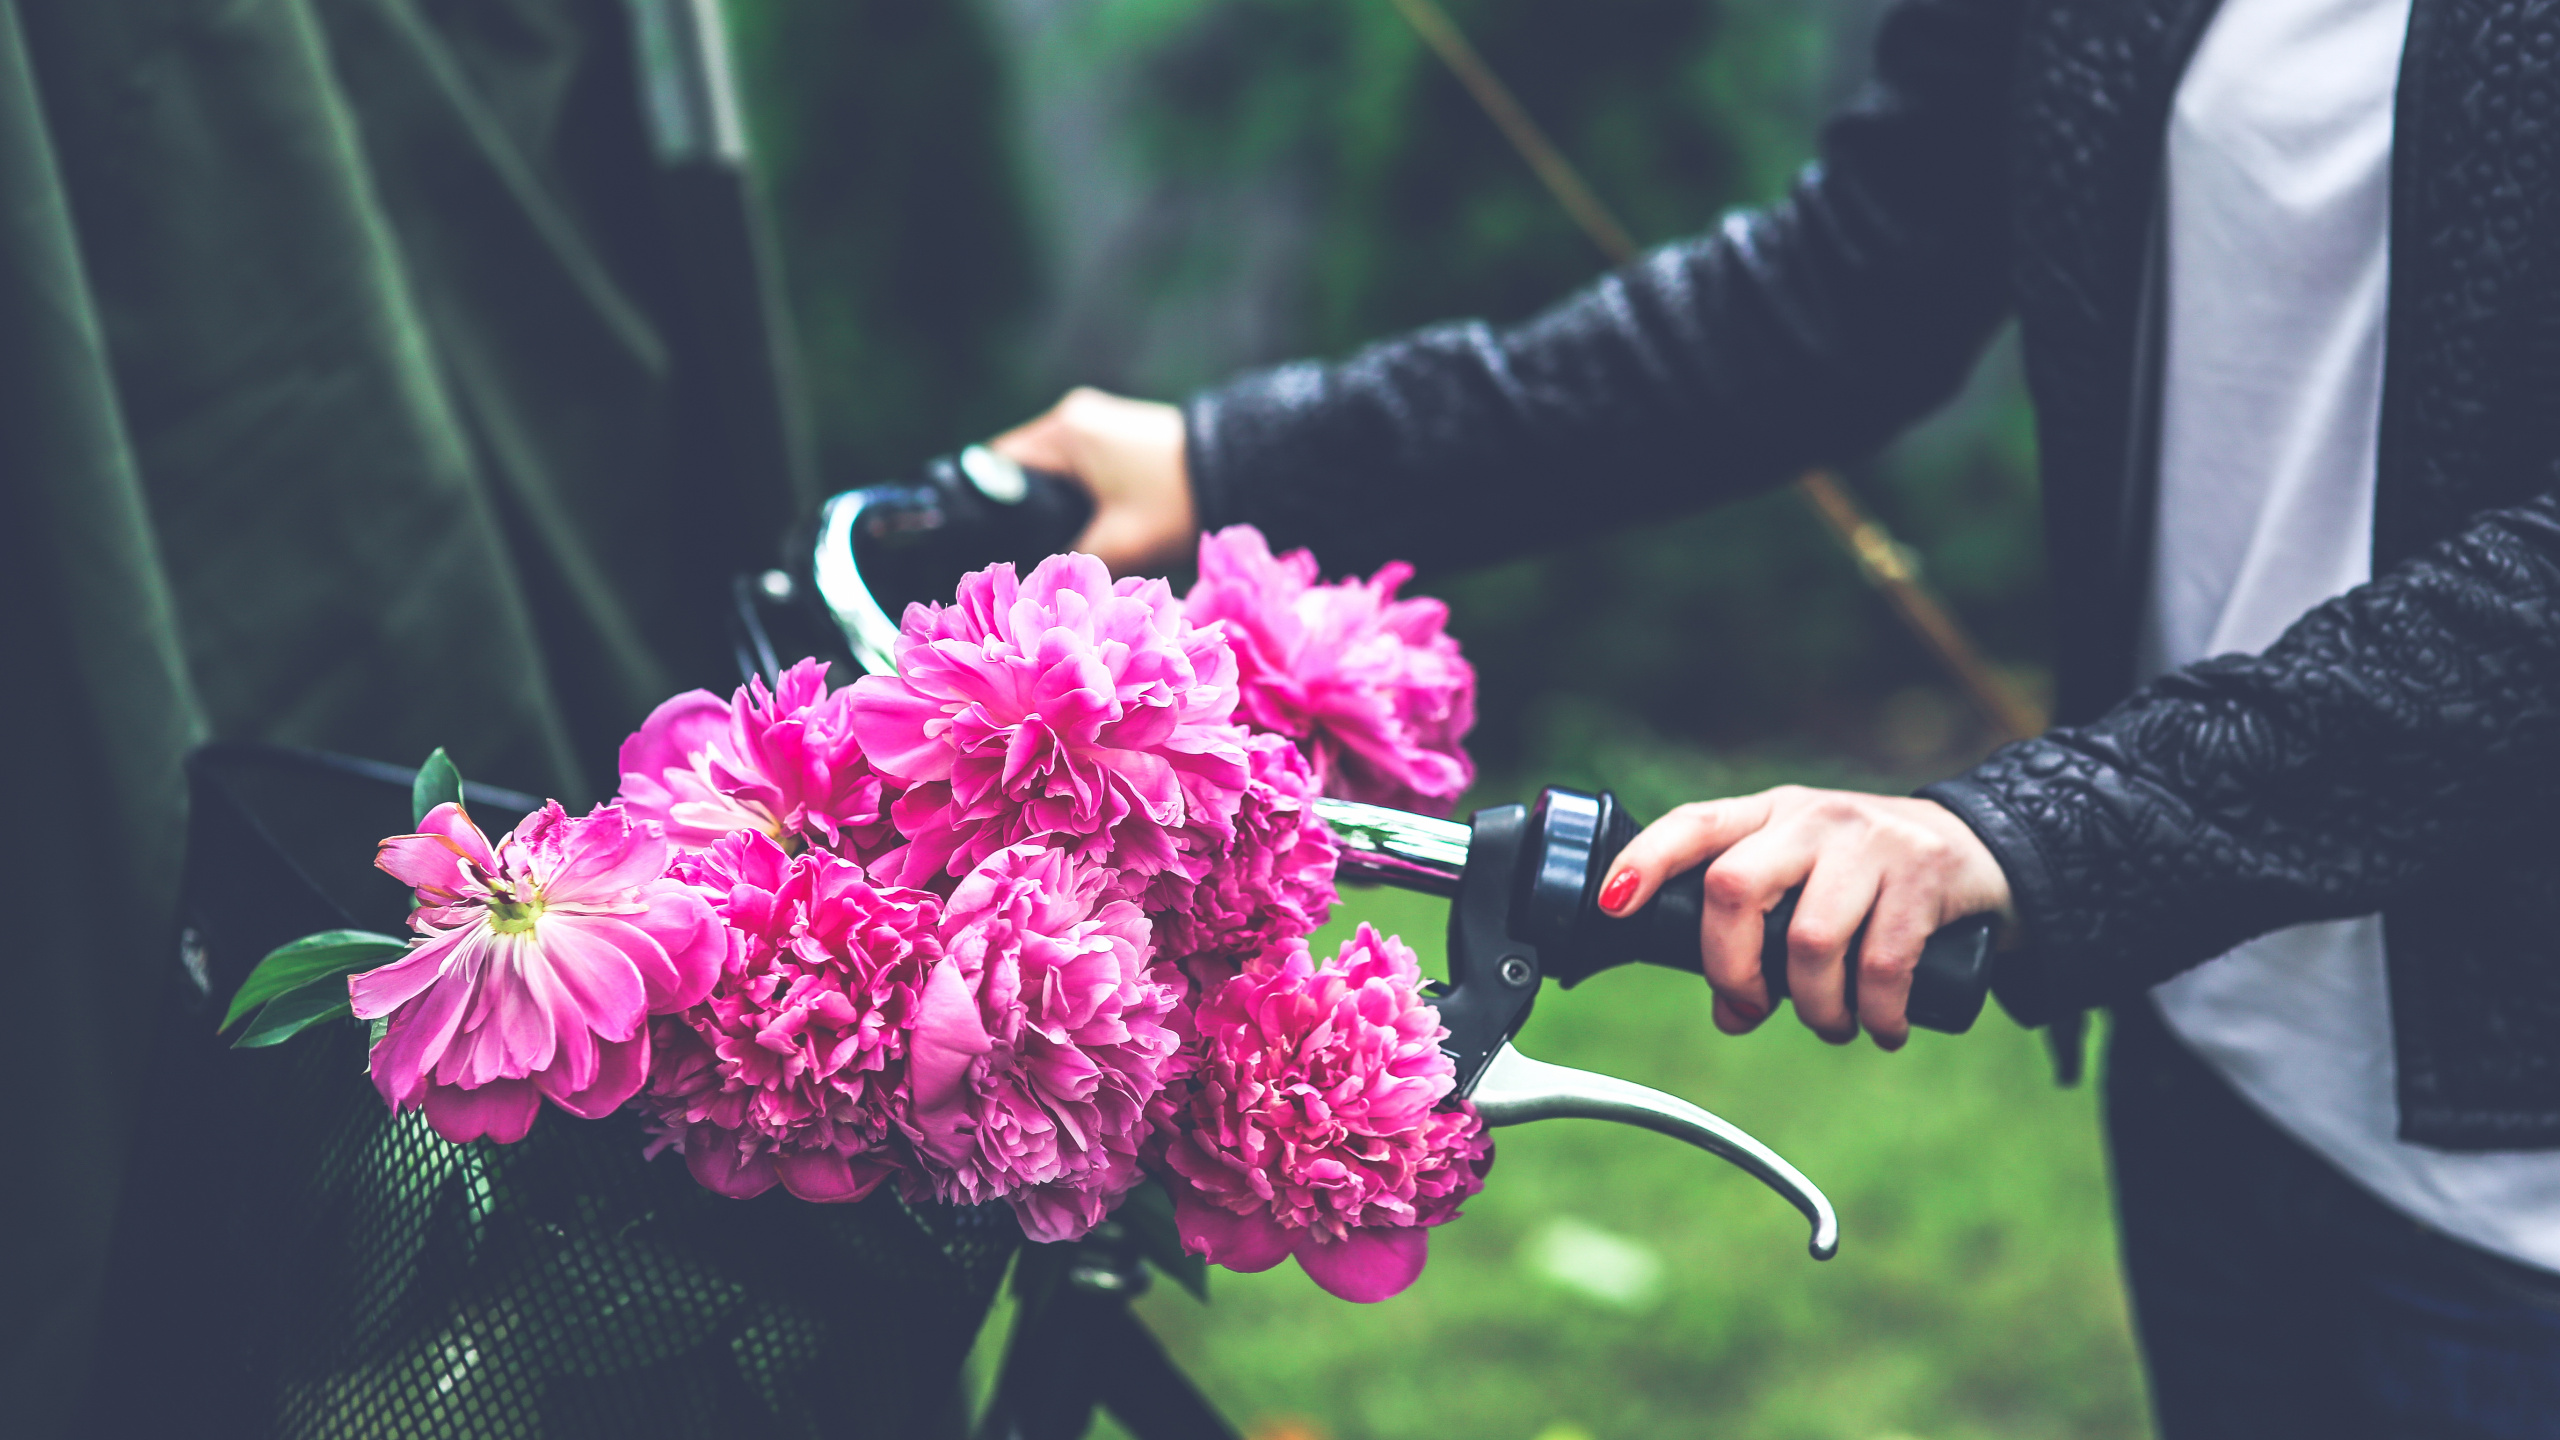 Person Holding Pink Flowers During Daytime. Wallpaper in 2560x1440 Resolution